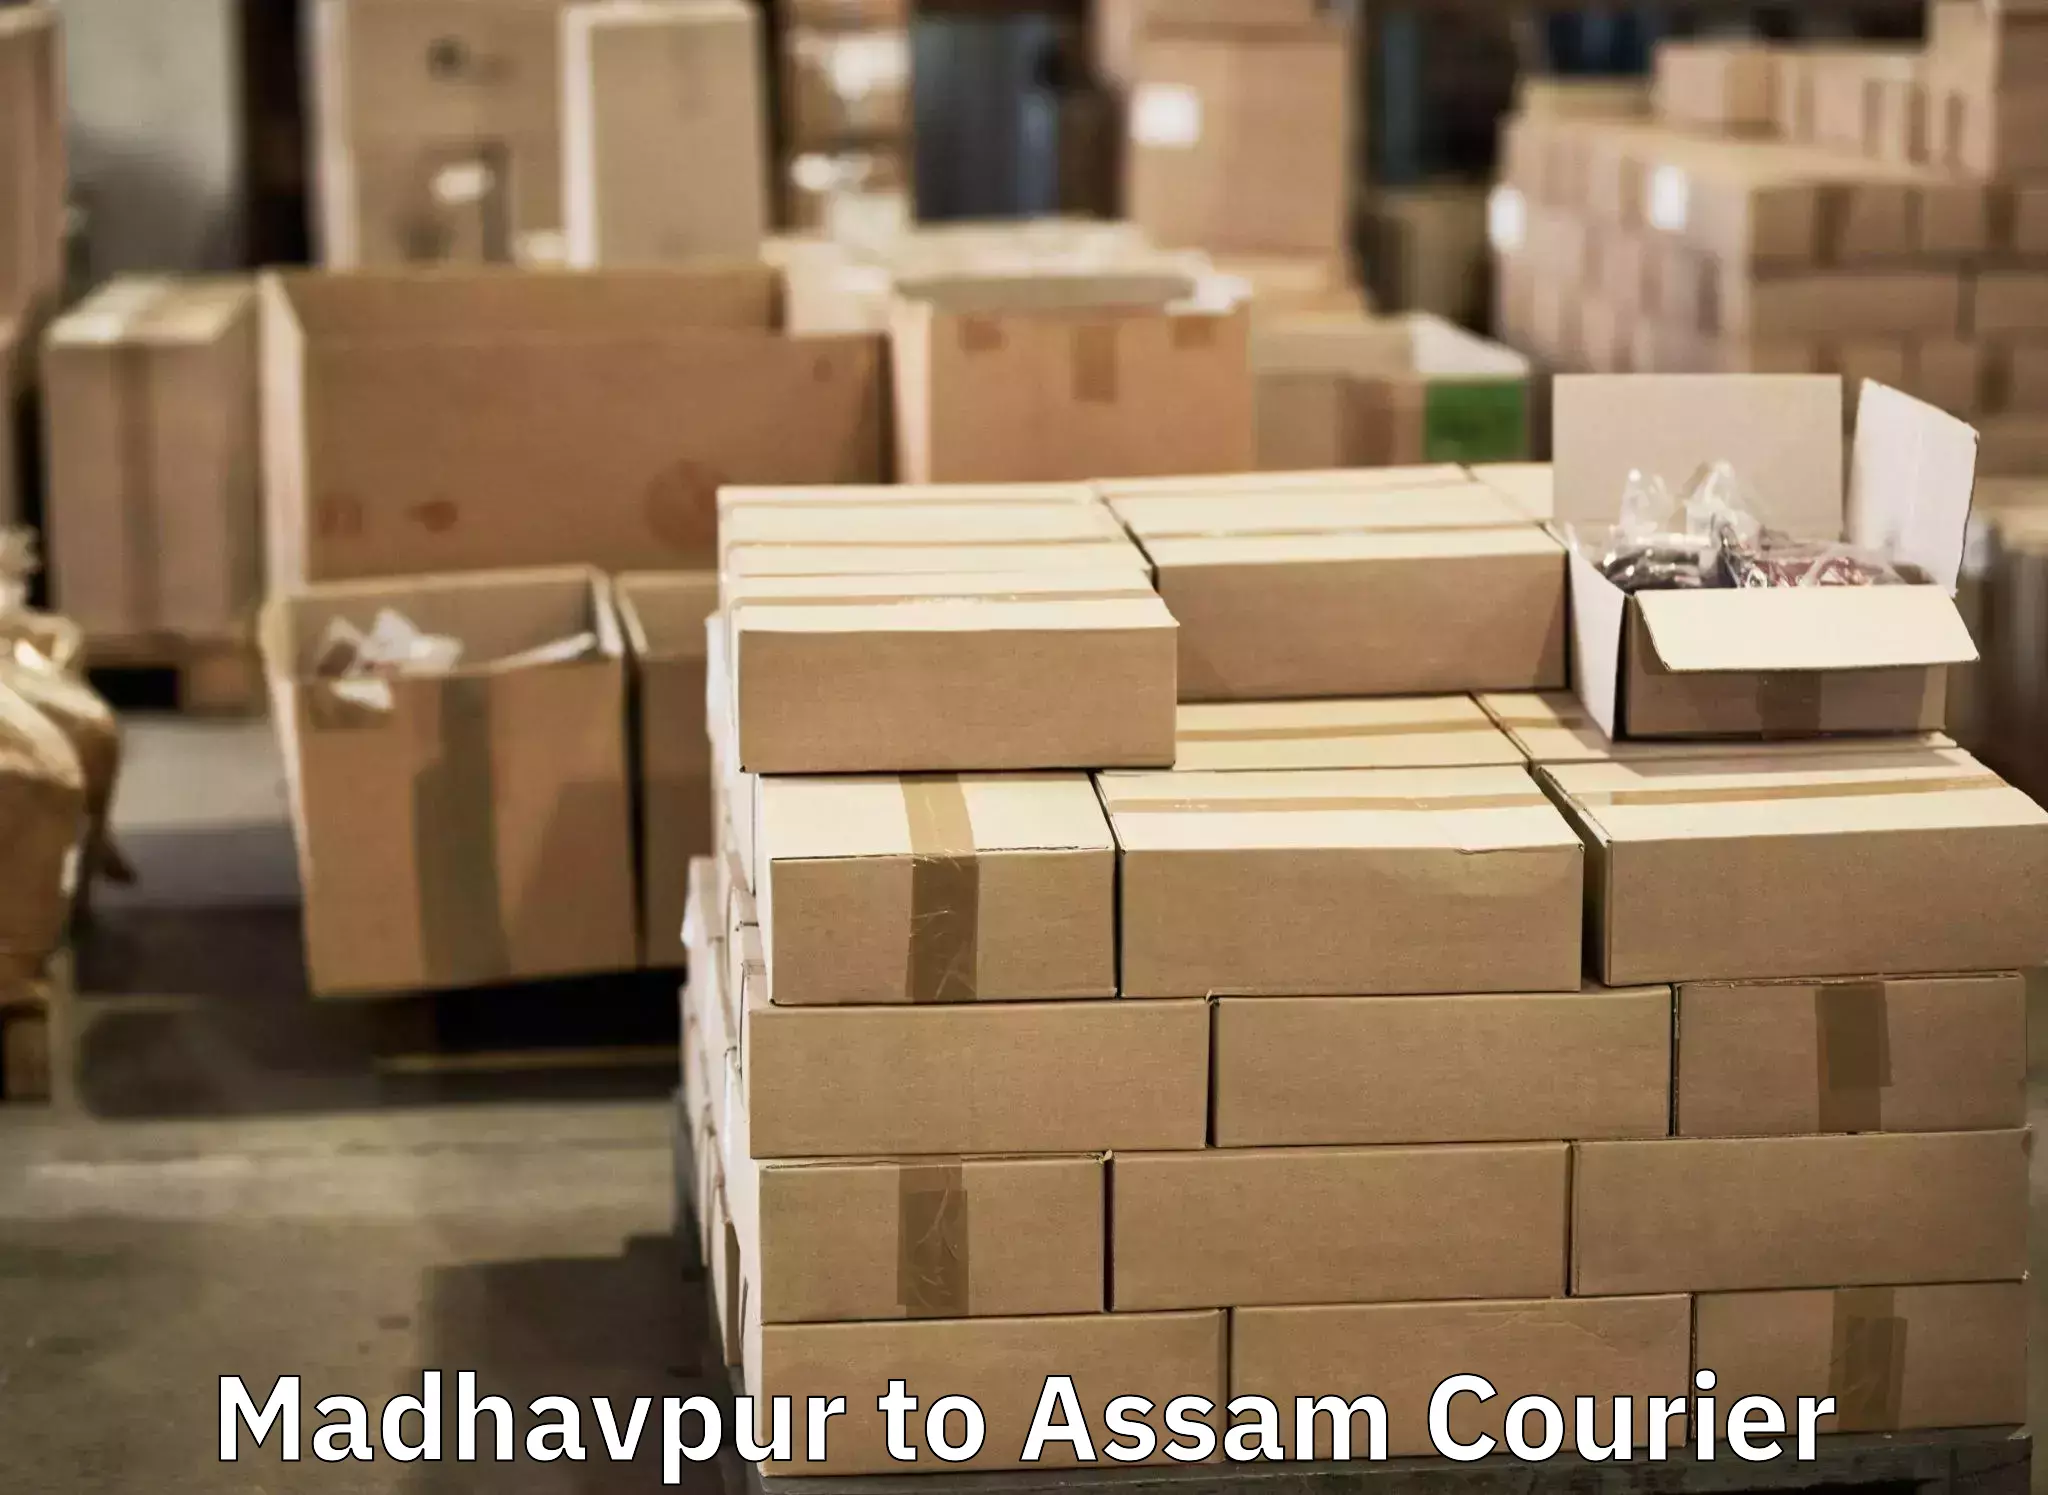 Baggage transport network Madhavpur to Sonitpur